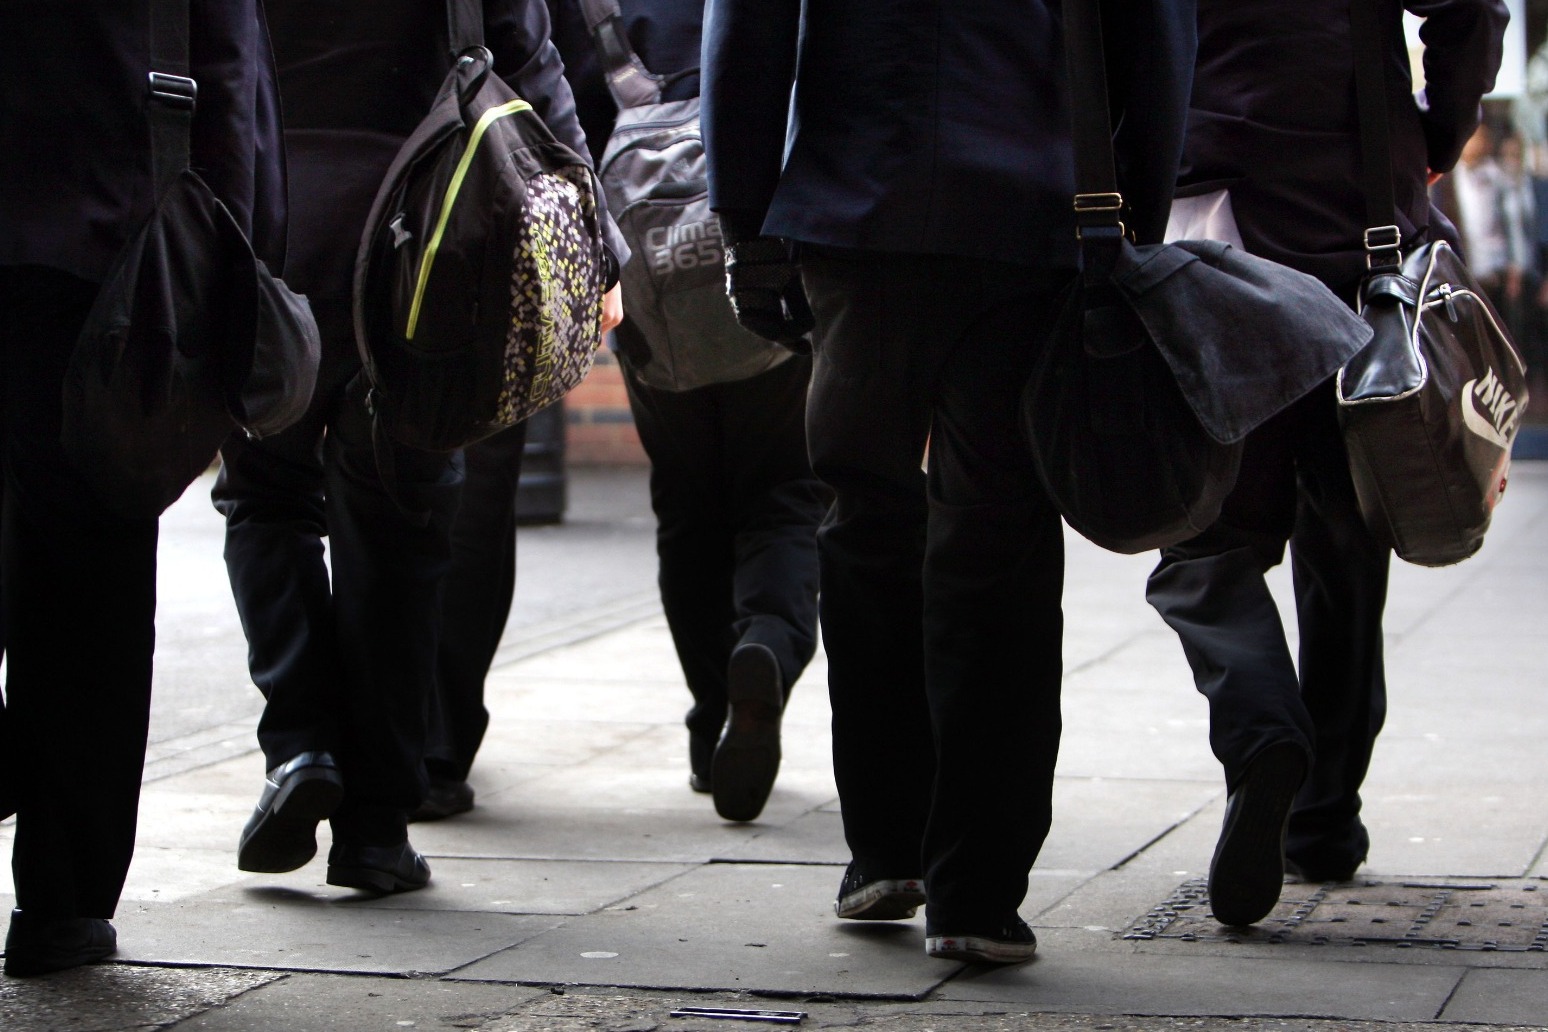 School uniforms still not affordable for many parents, says charity 